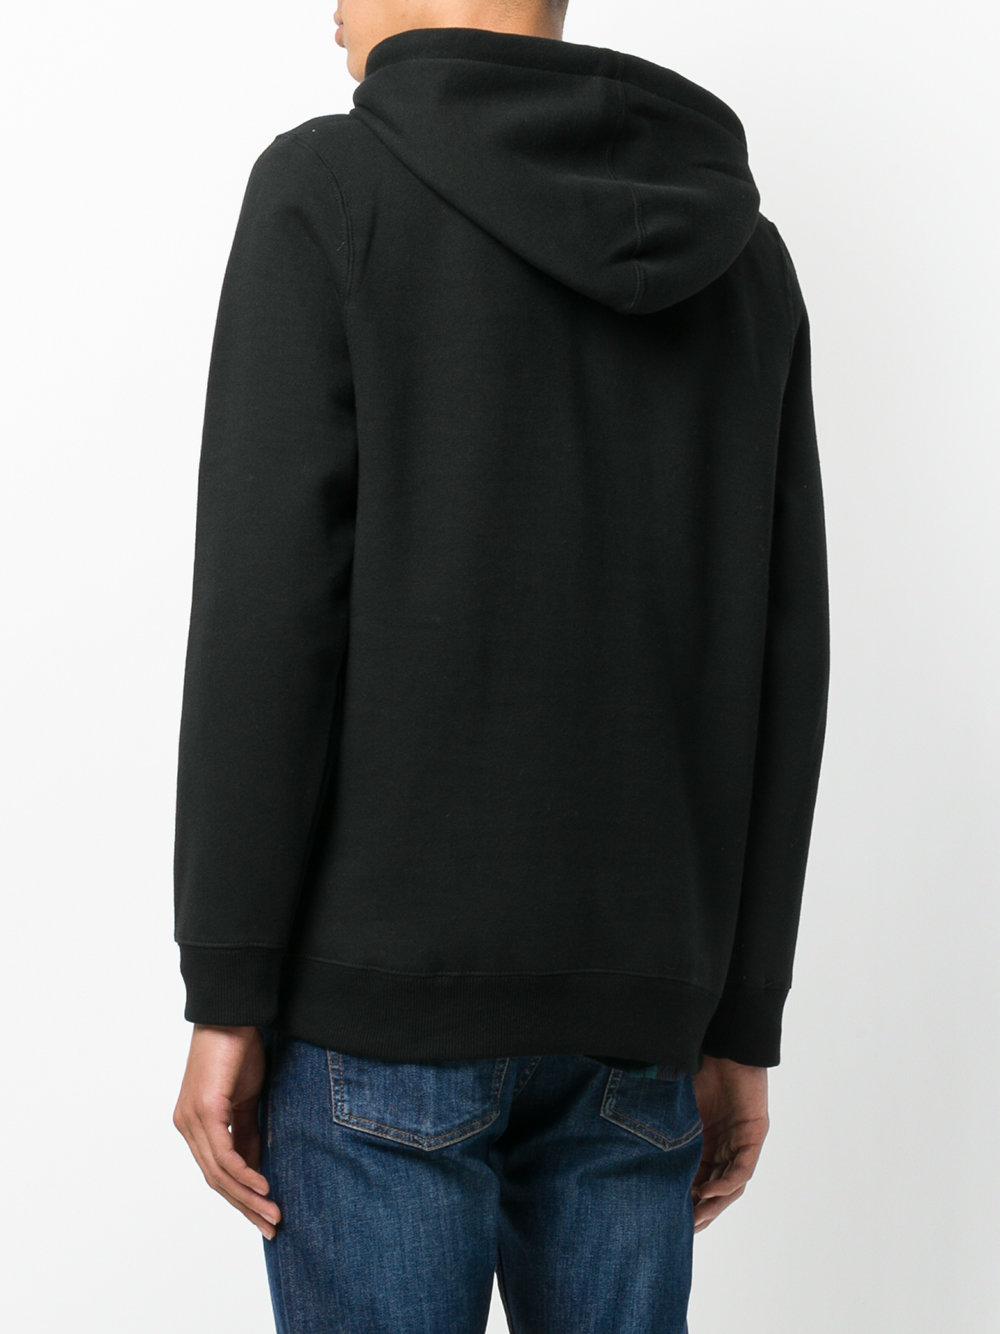 Lyst - Stussy Logo Embroidered Hoodie in Black for Men